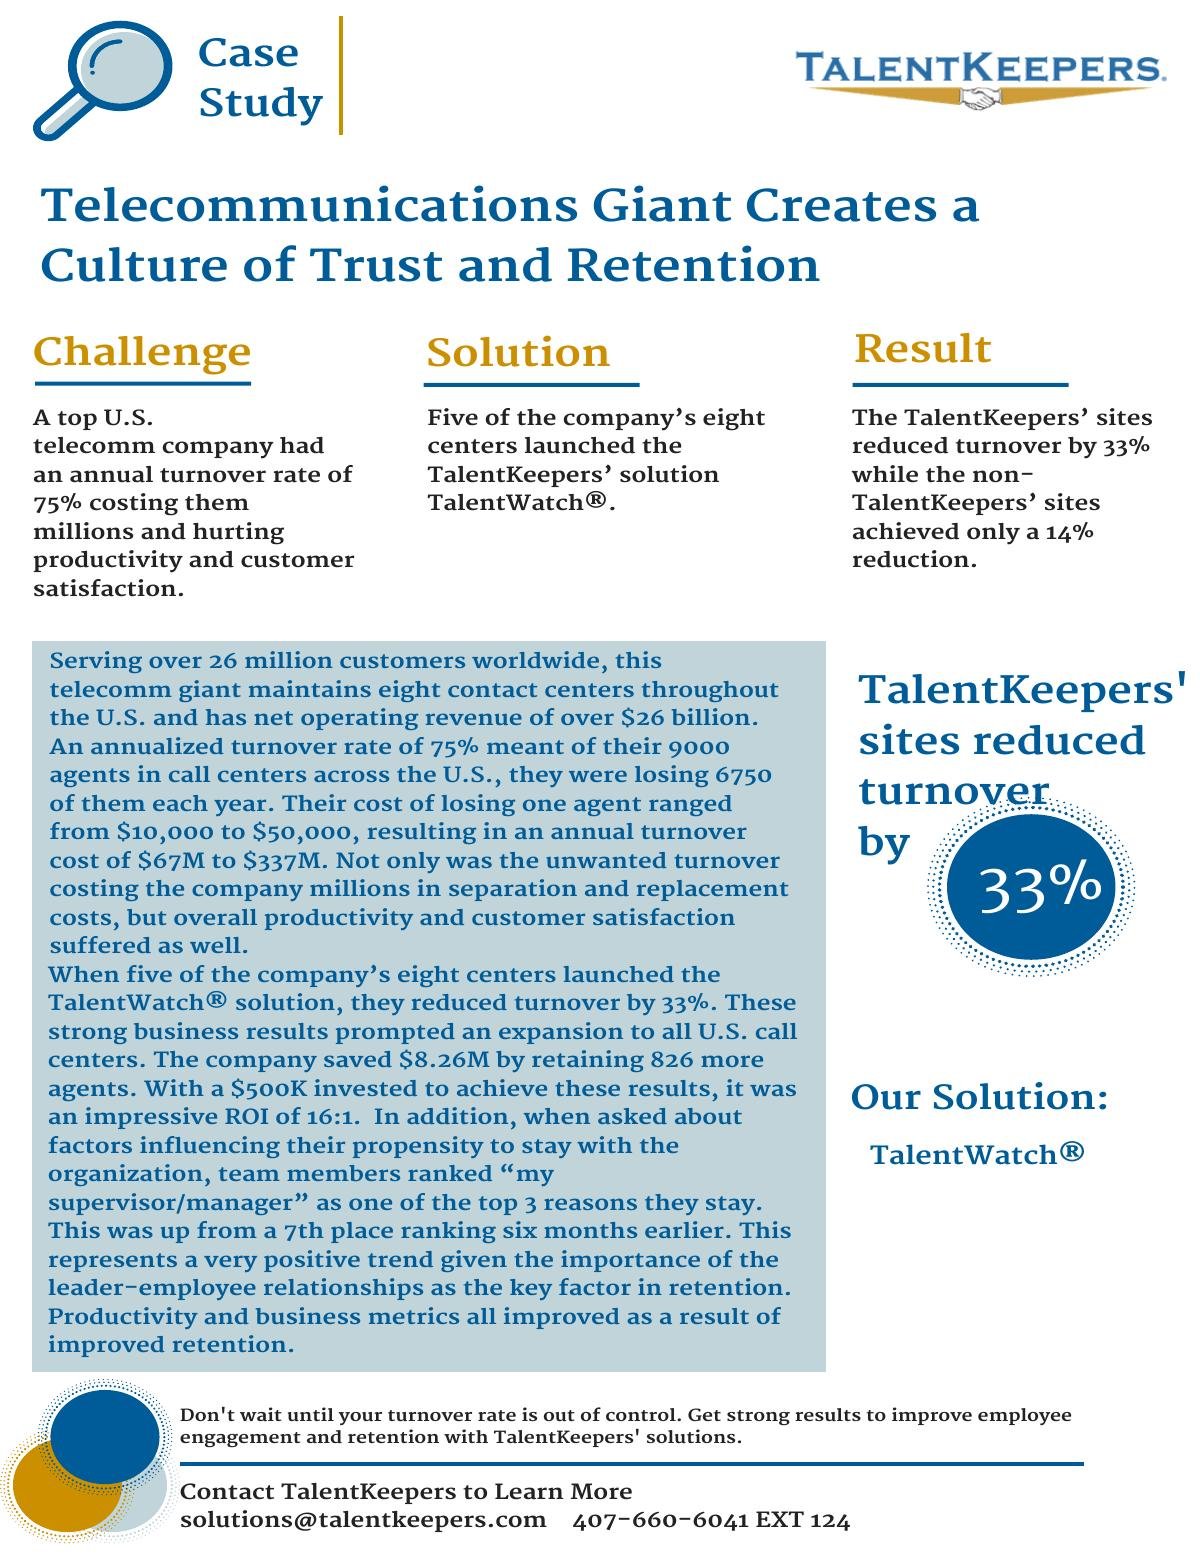 Telecommunications Giant Creates a Culture of Trust and Retention